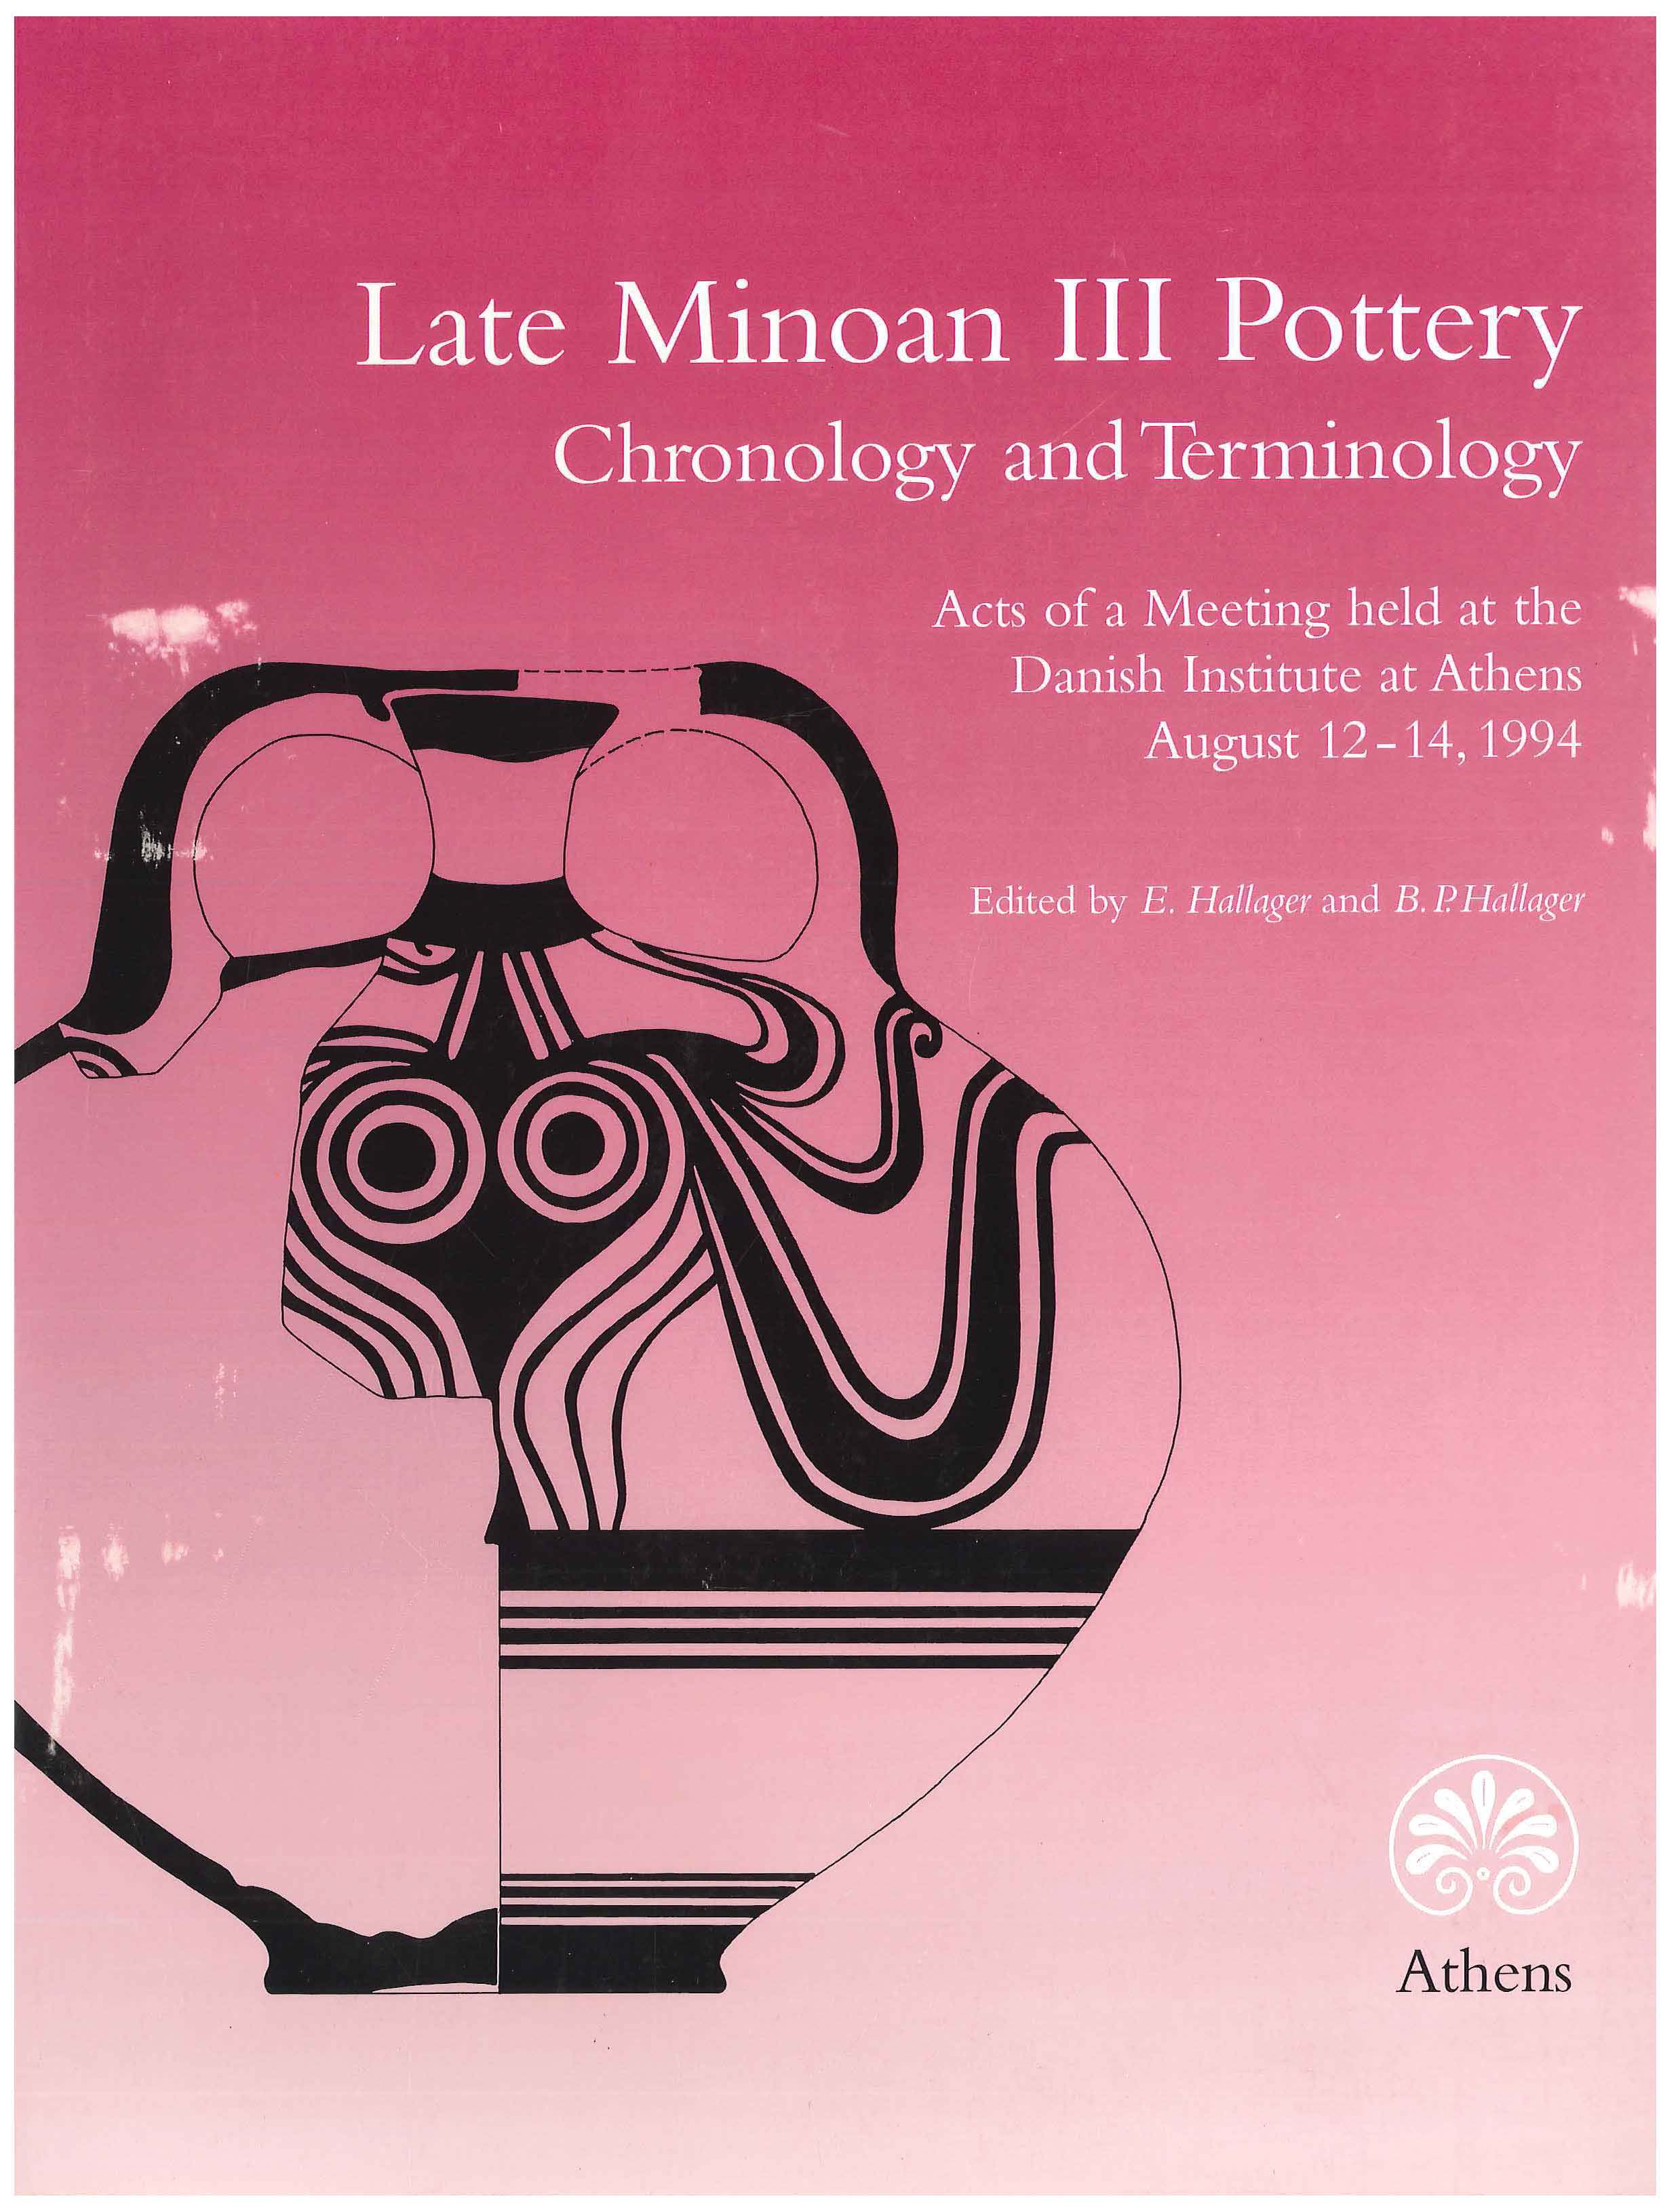 					View Vol. 1 (1997): Late Minoan III Pottery: Chronology and Terminology
				